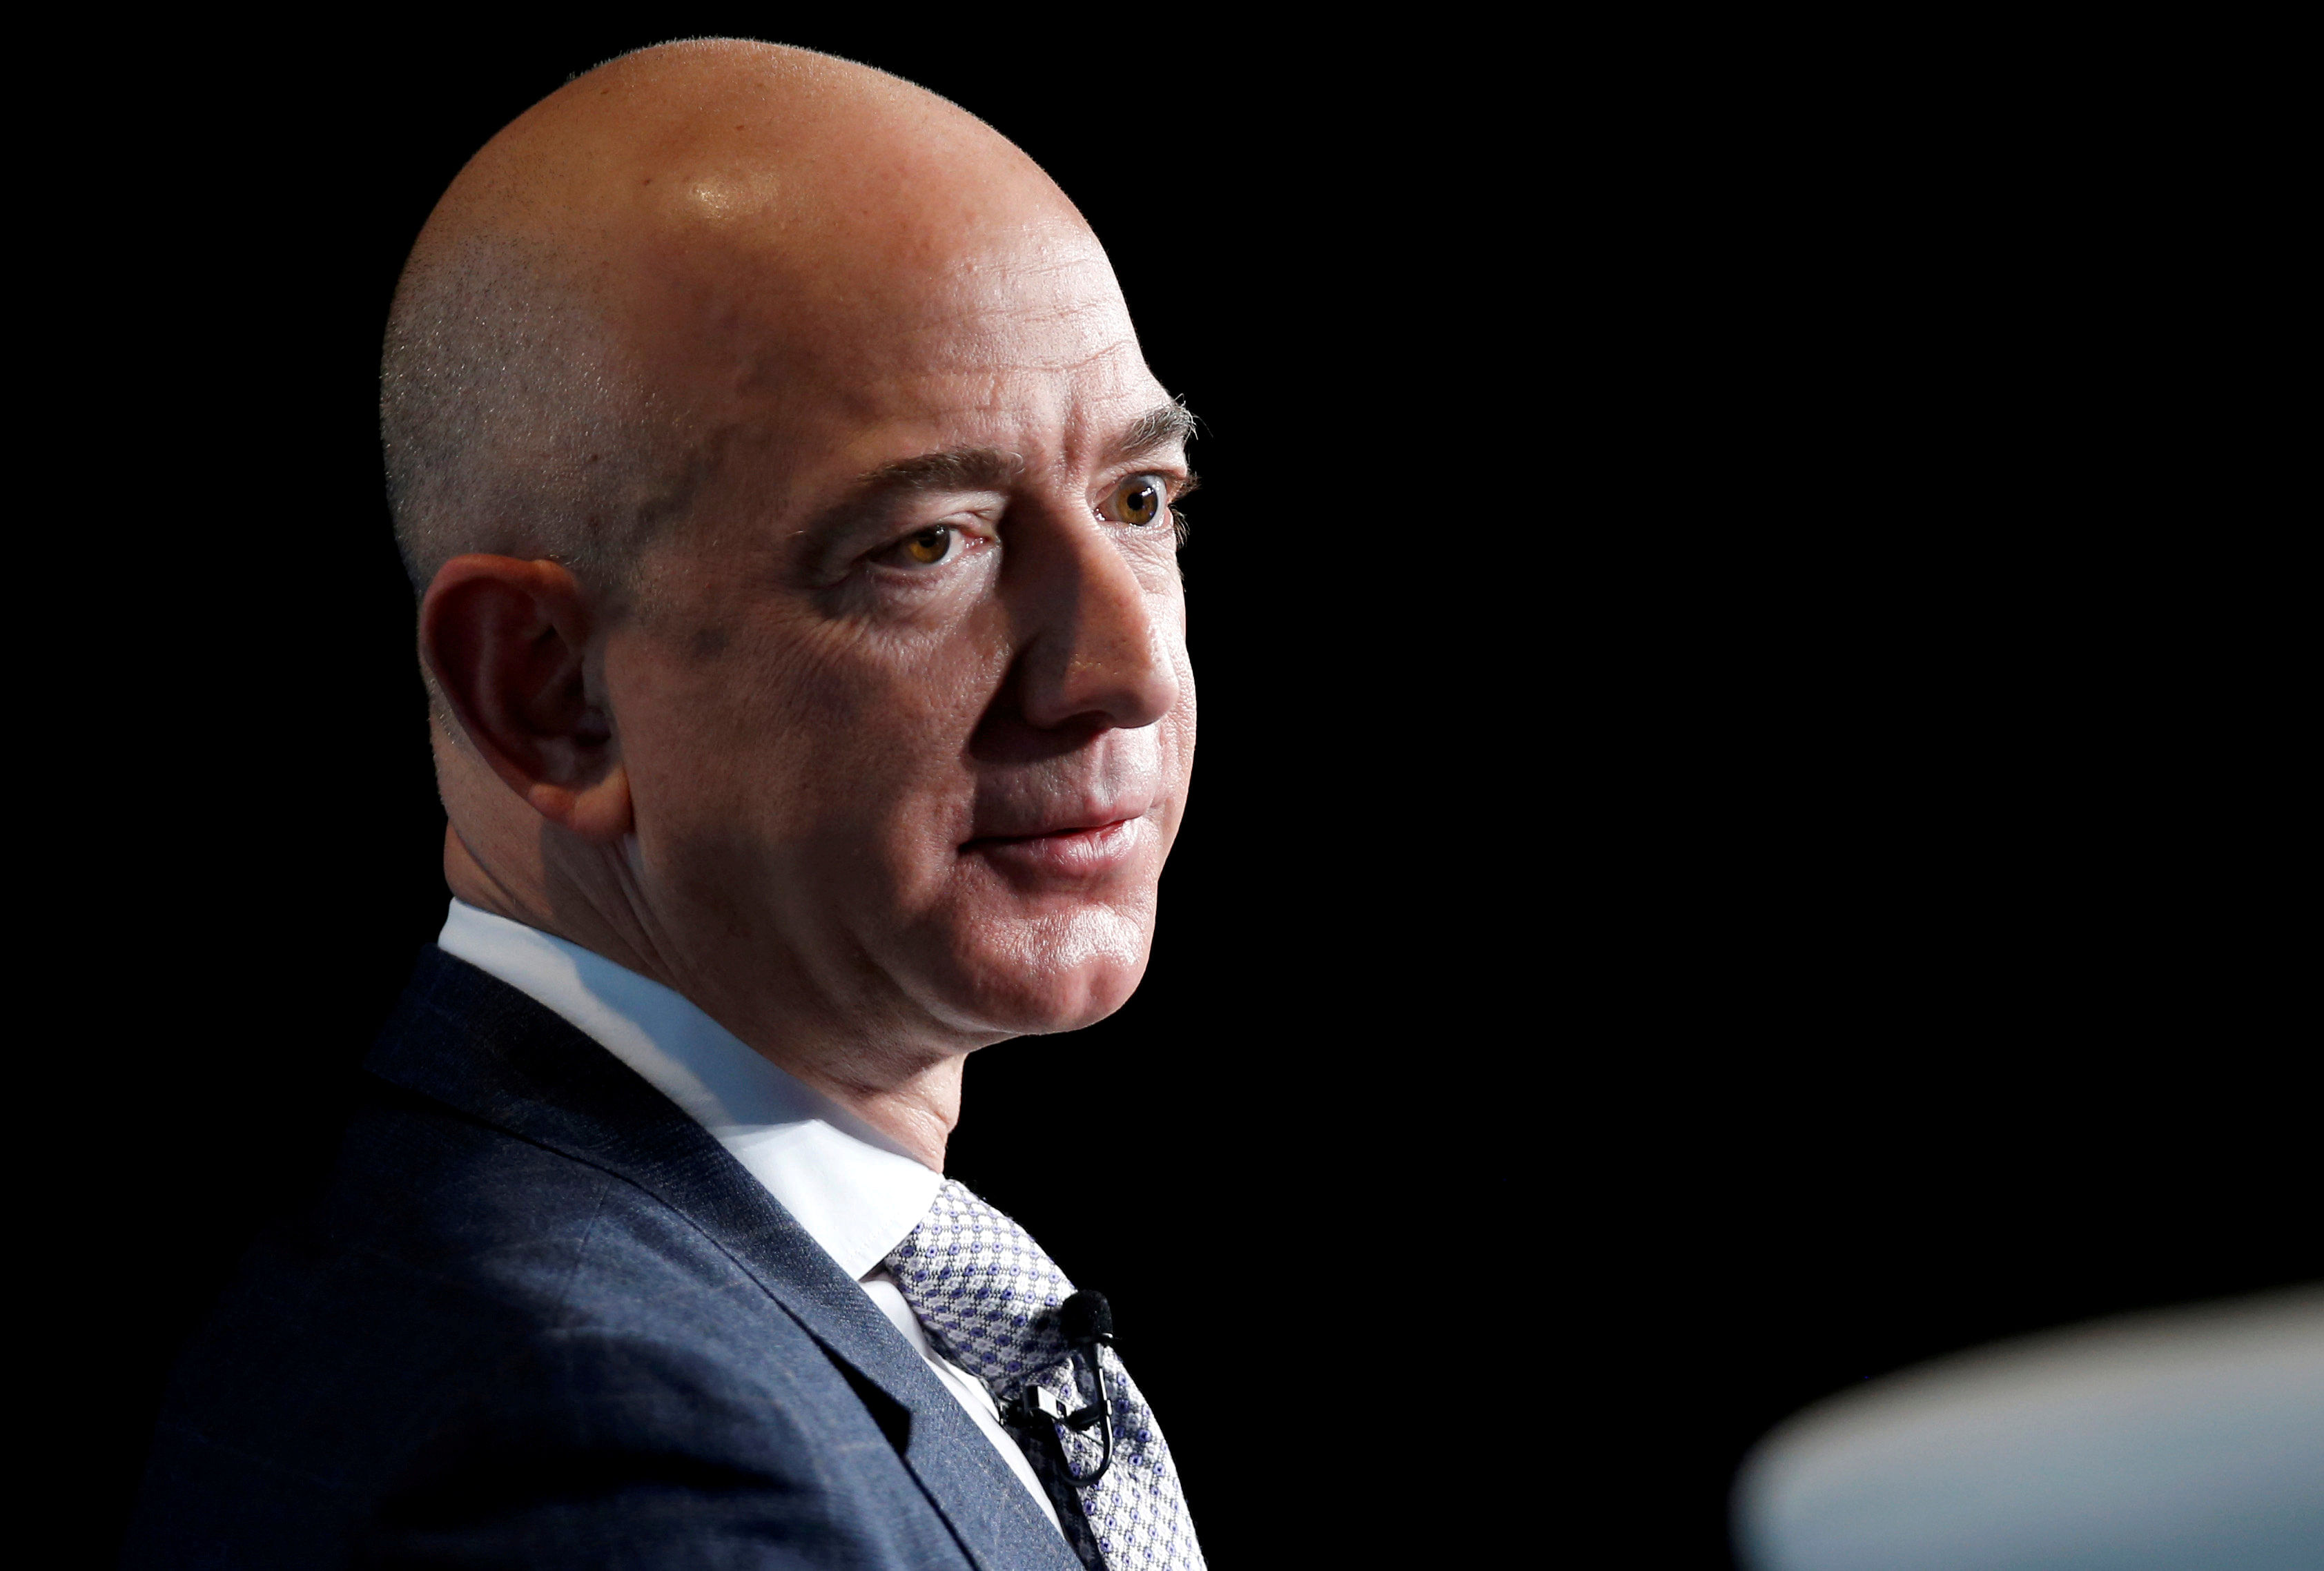 Amazon founder and CEO Jeff Bezos. Credit: Reuters File Photo